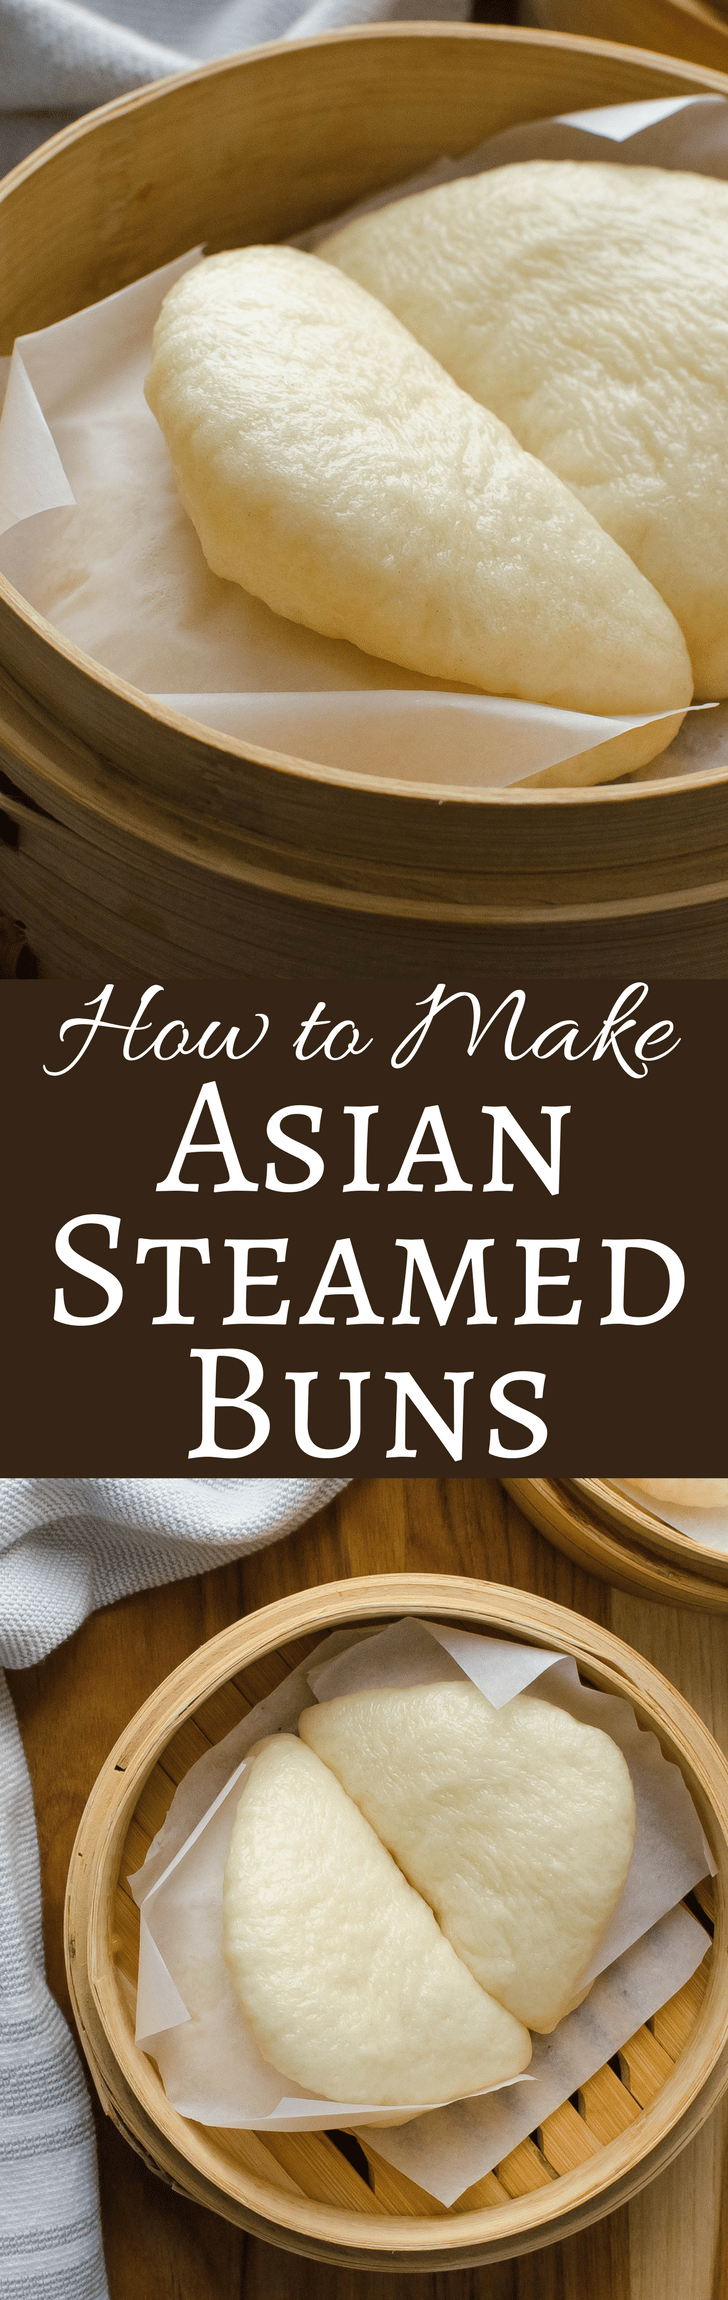 If you love Bao Buns, but have never made them, get this step-by-step recipe that will teach you how to make Asian Steamed Buns at home! These Asian buns are delicious with any number of fillings. #bao #asianbuns #baobuns #baobunrecipe #asianbunrecipe #steamedbuns #steamedbunrecipe #howtomakesteamedbuns #asiansteamerrecipe #asiansteamer